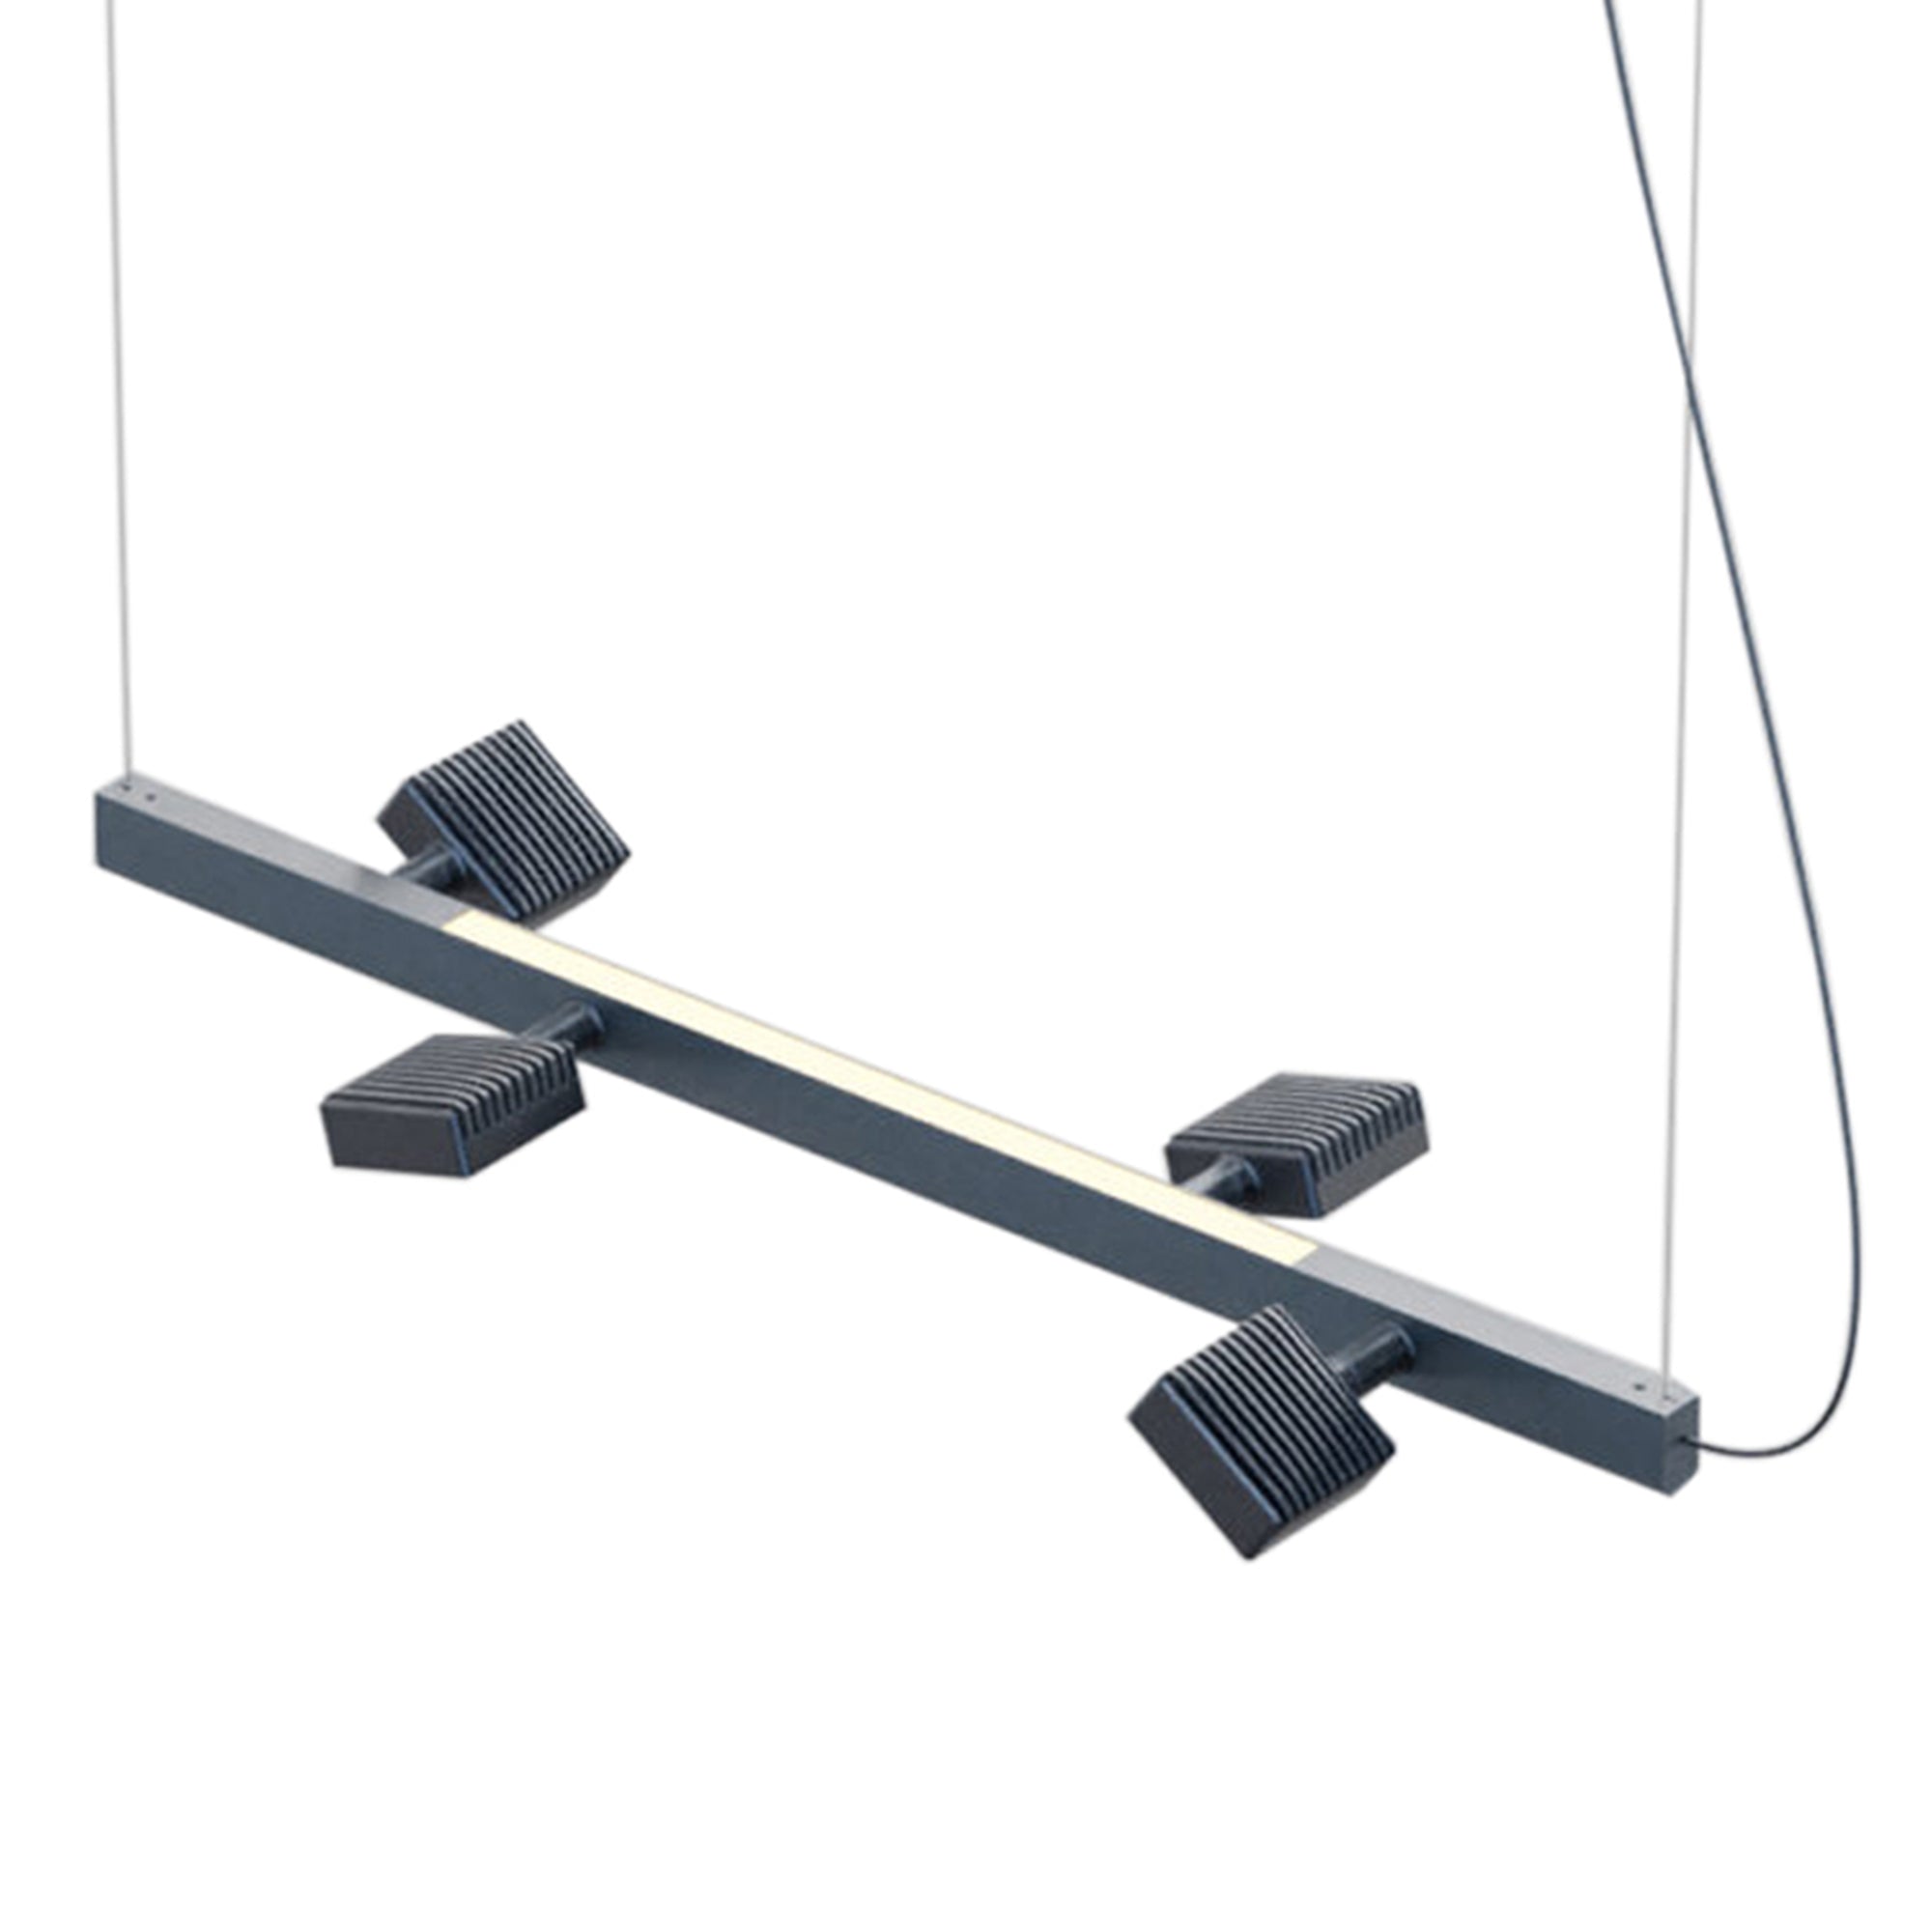 Dorval 05 Suspension Lamp with Uplight: 4 Heads + Midnight Blue + Large - 96.1